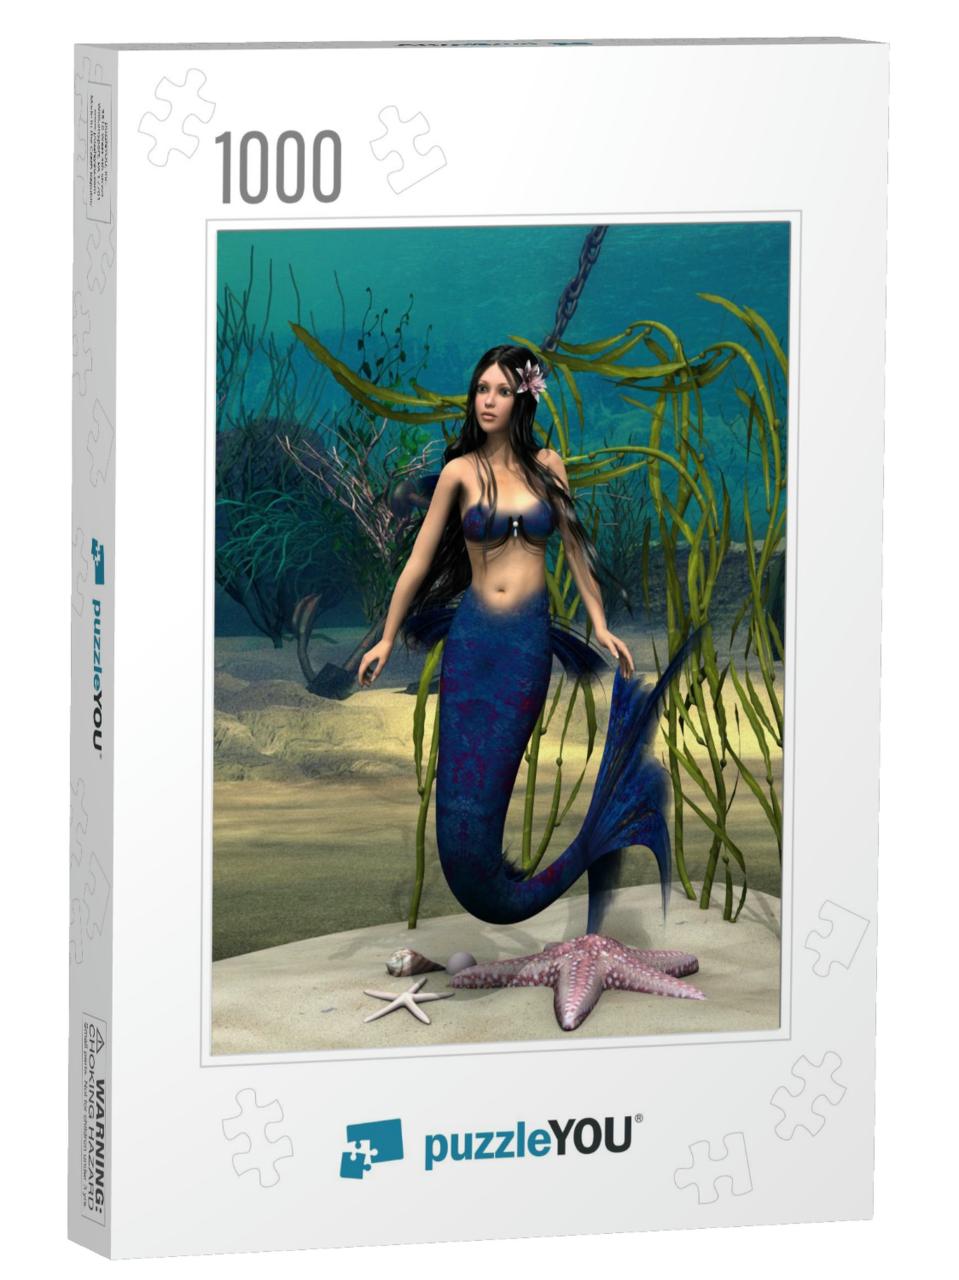 3D Digital Render of a Cute Mermaid on Blue Fantasy Ocean... Jigsaw Puzzle with 1000 pieces